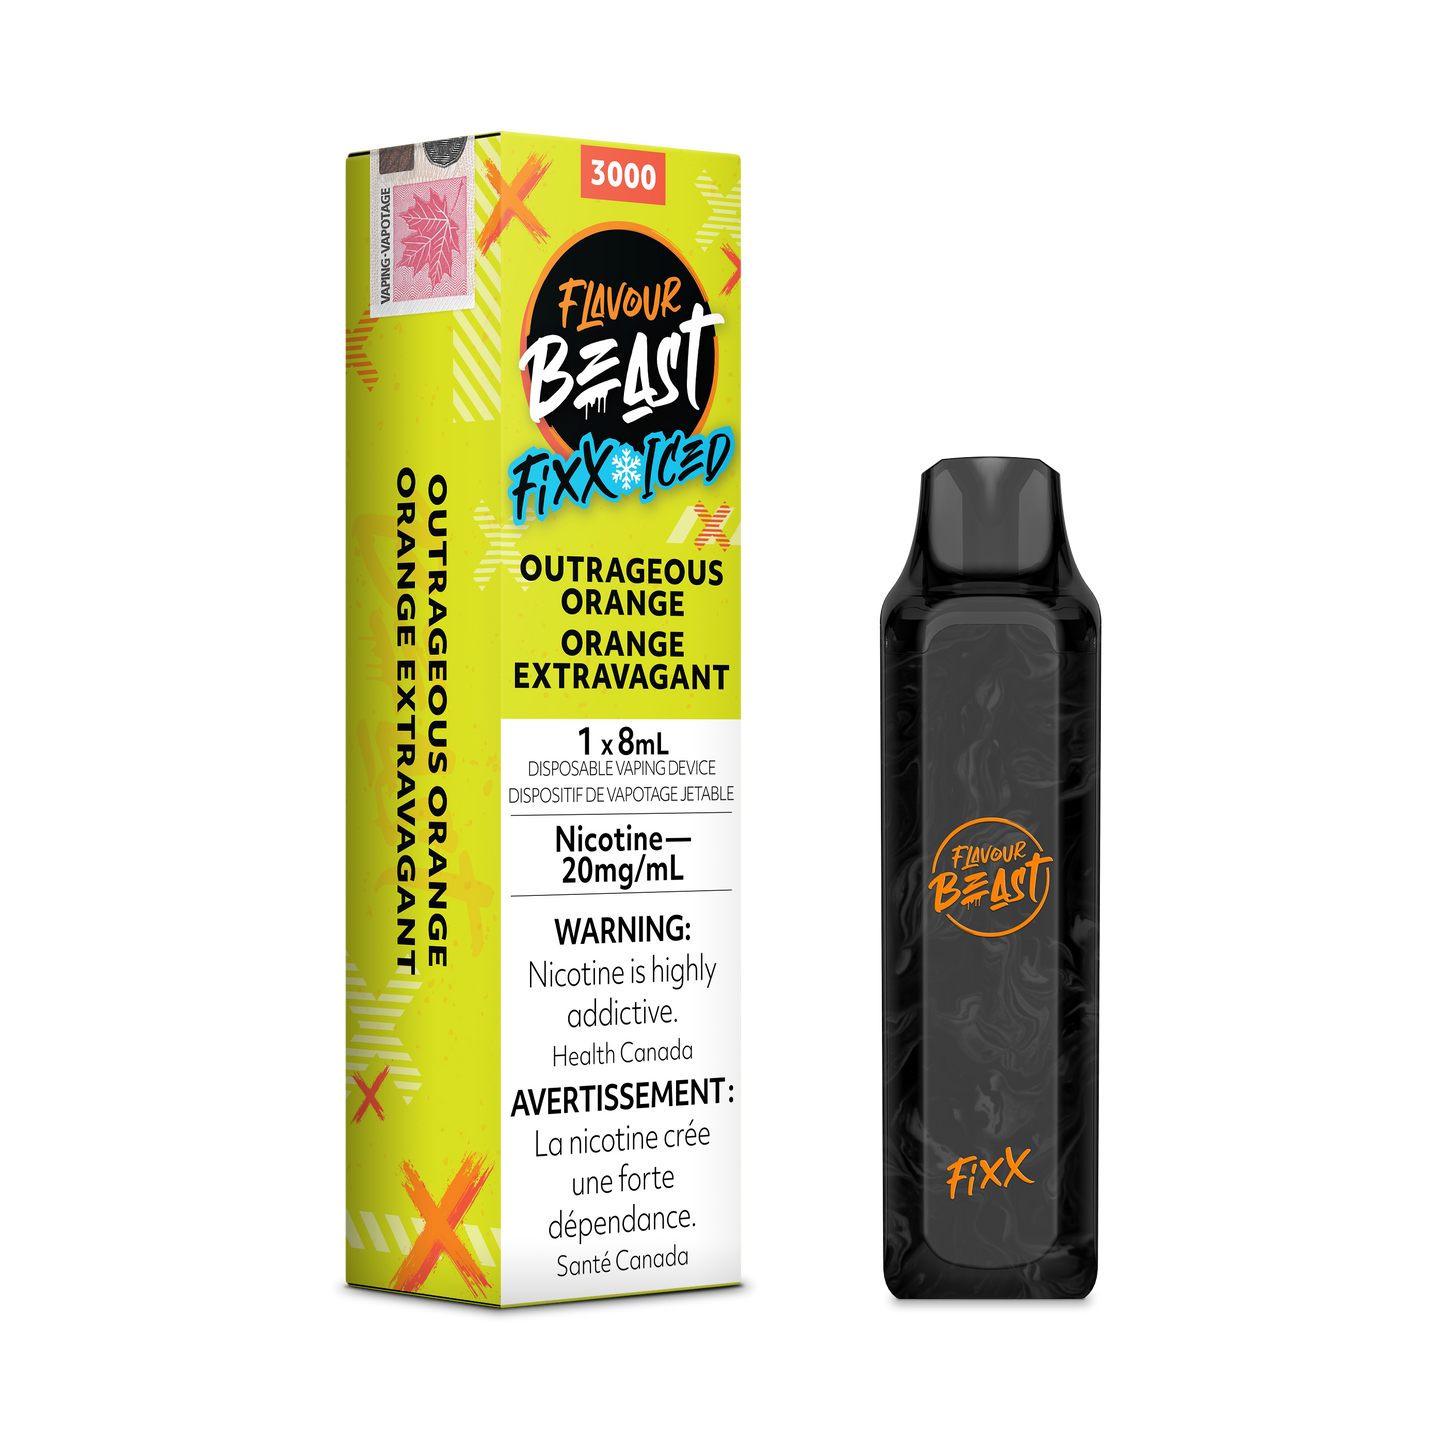 FLAVOUR BEAST FIXX 3000 PUFF DISPOSABLE